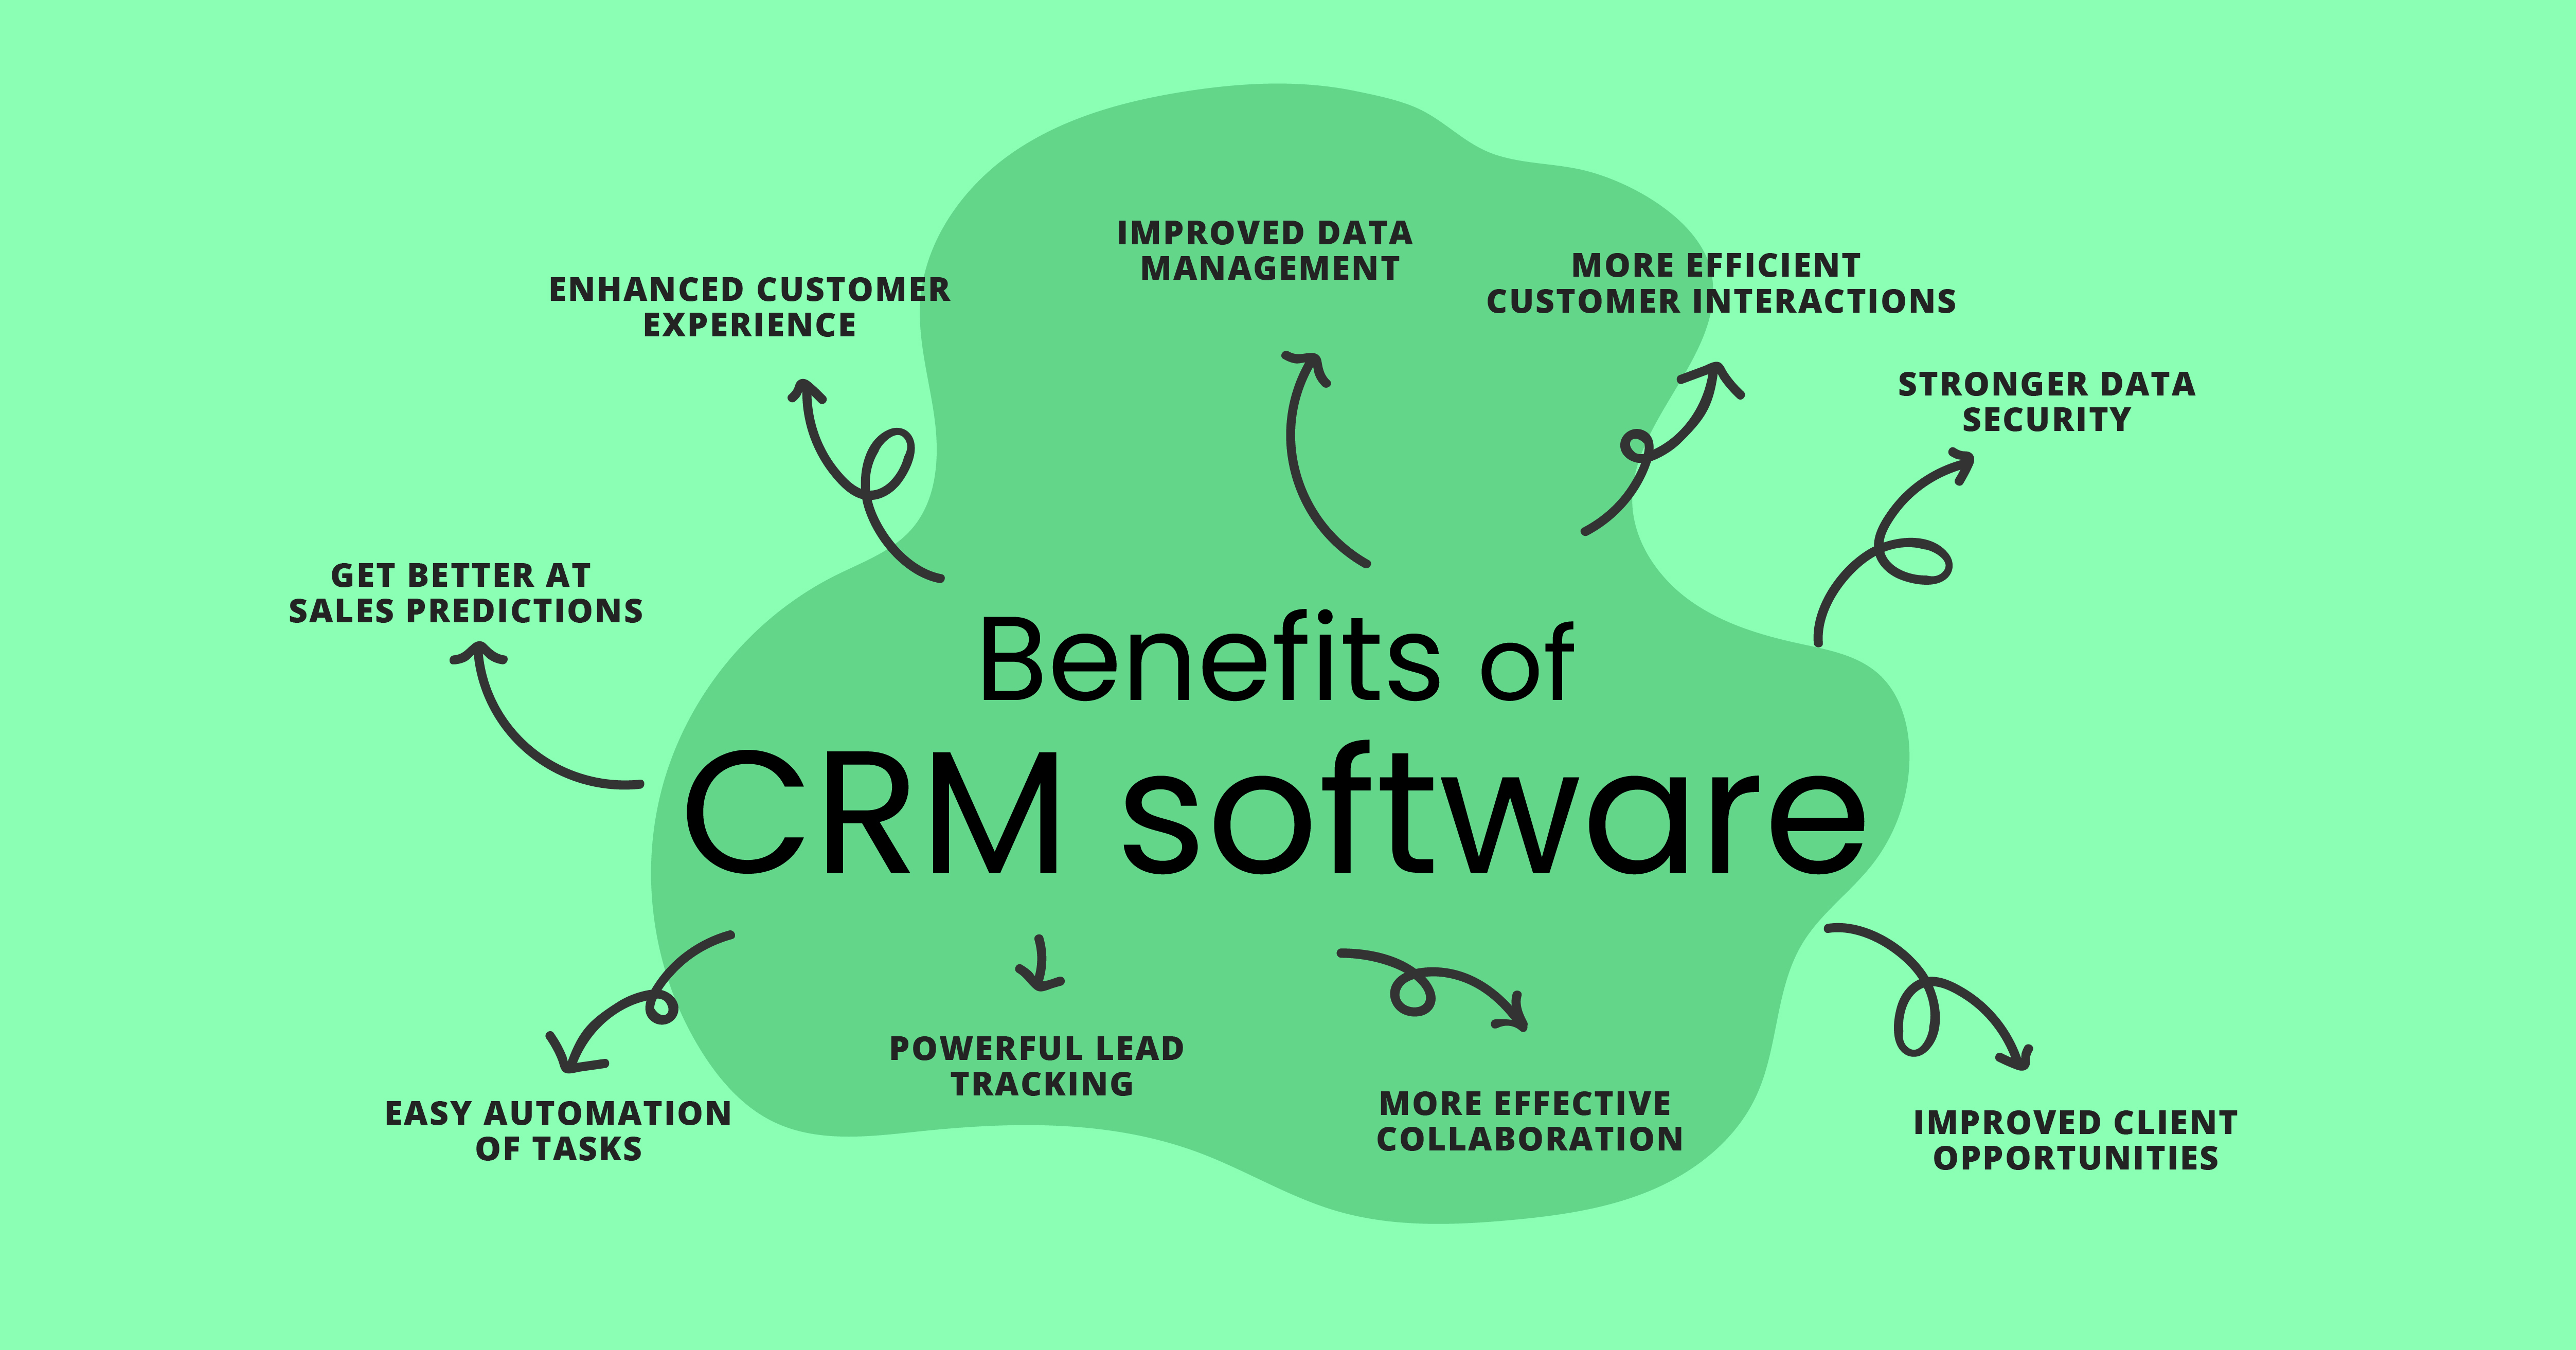 Benefits for CRM software